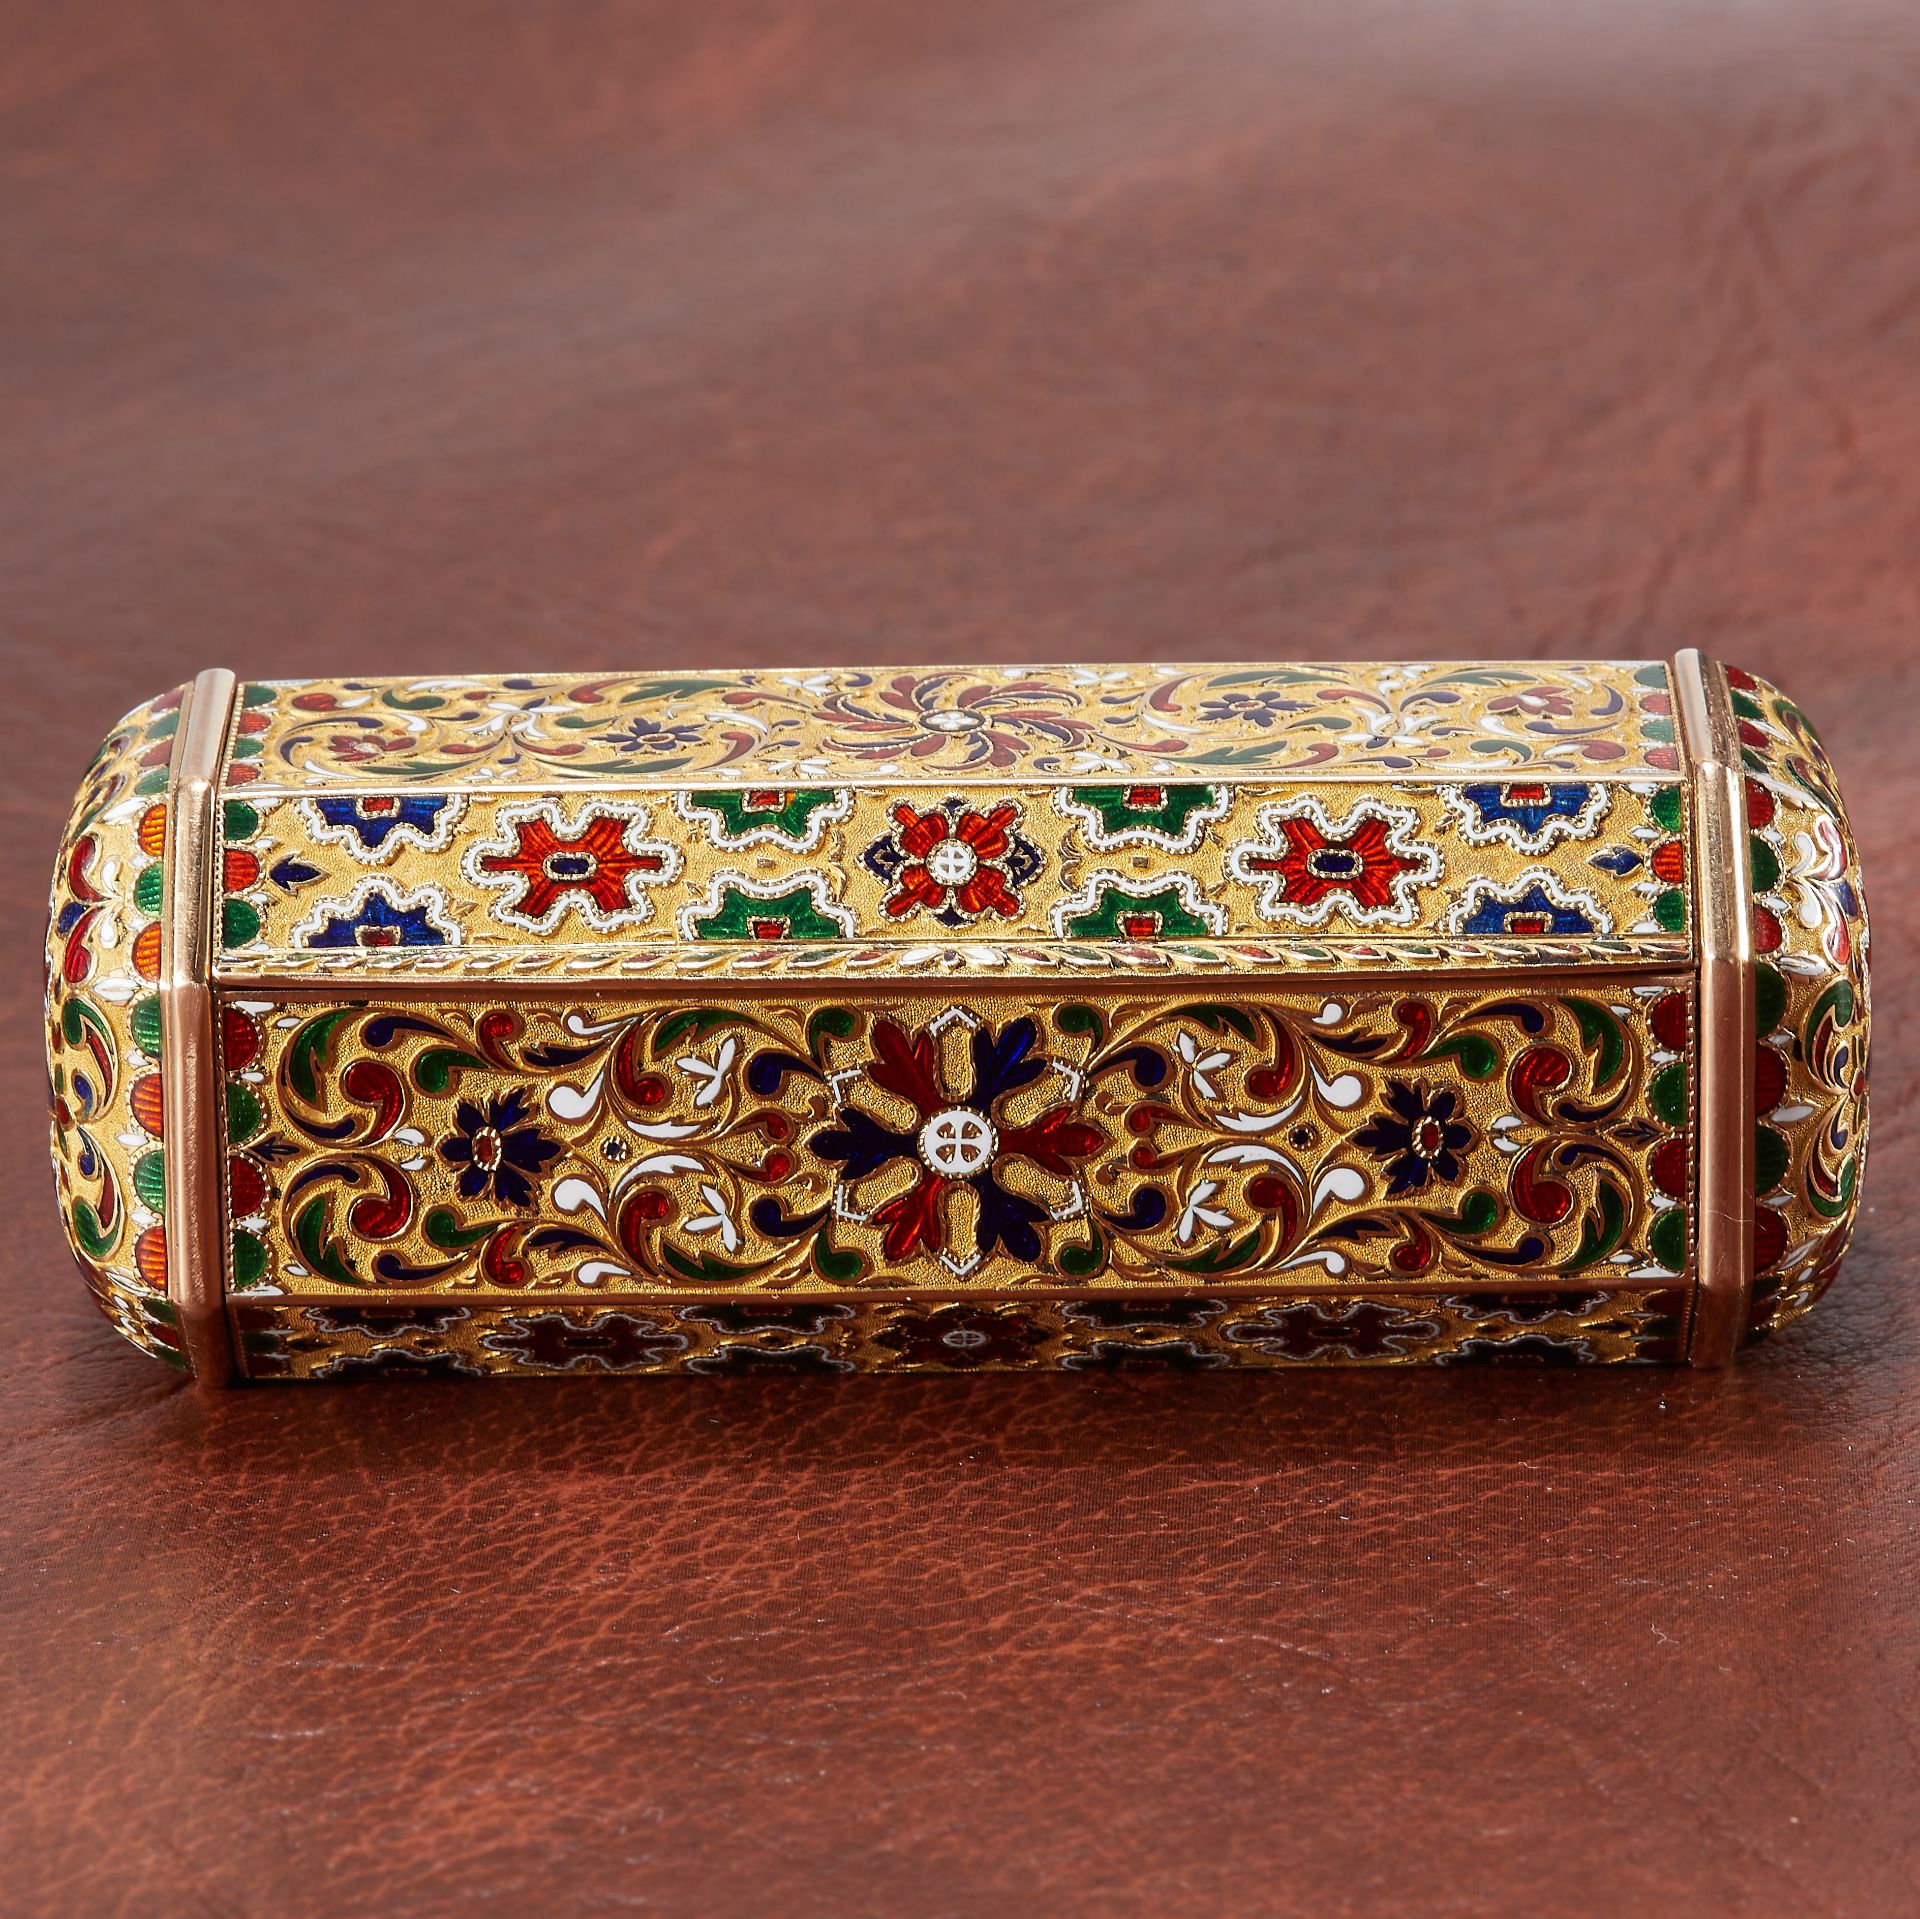 J.F BAUTTE & CIE, GENEVA. 1826-1837, A RARE AND FINE GOLD AND ENAMEL ELONGATED OCTAGONAL SNUFFBOX - Image 4 of 4